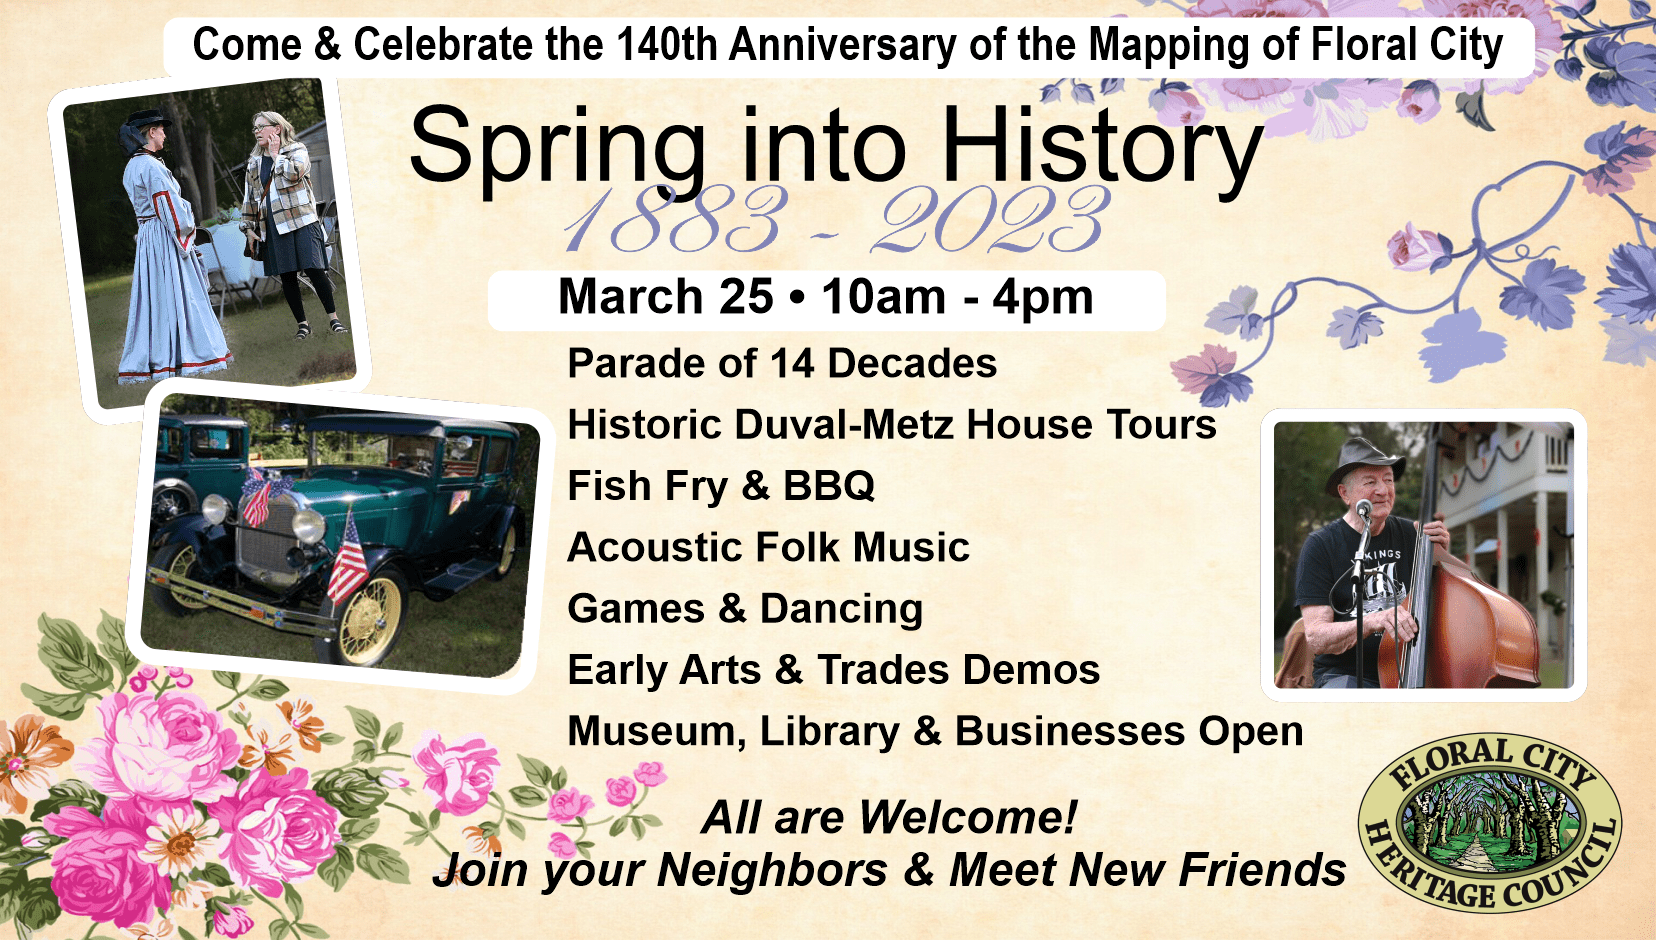 floral city spring into history 2023